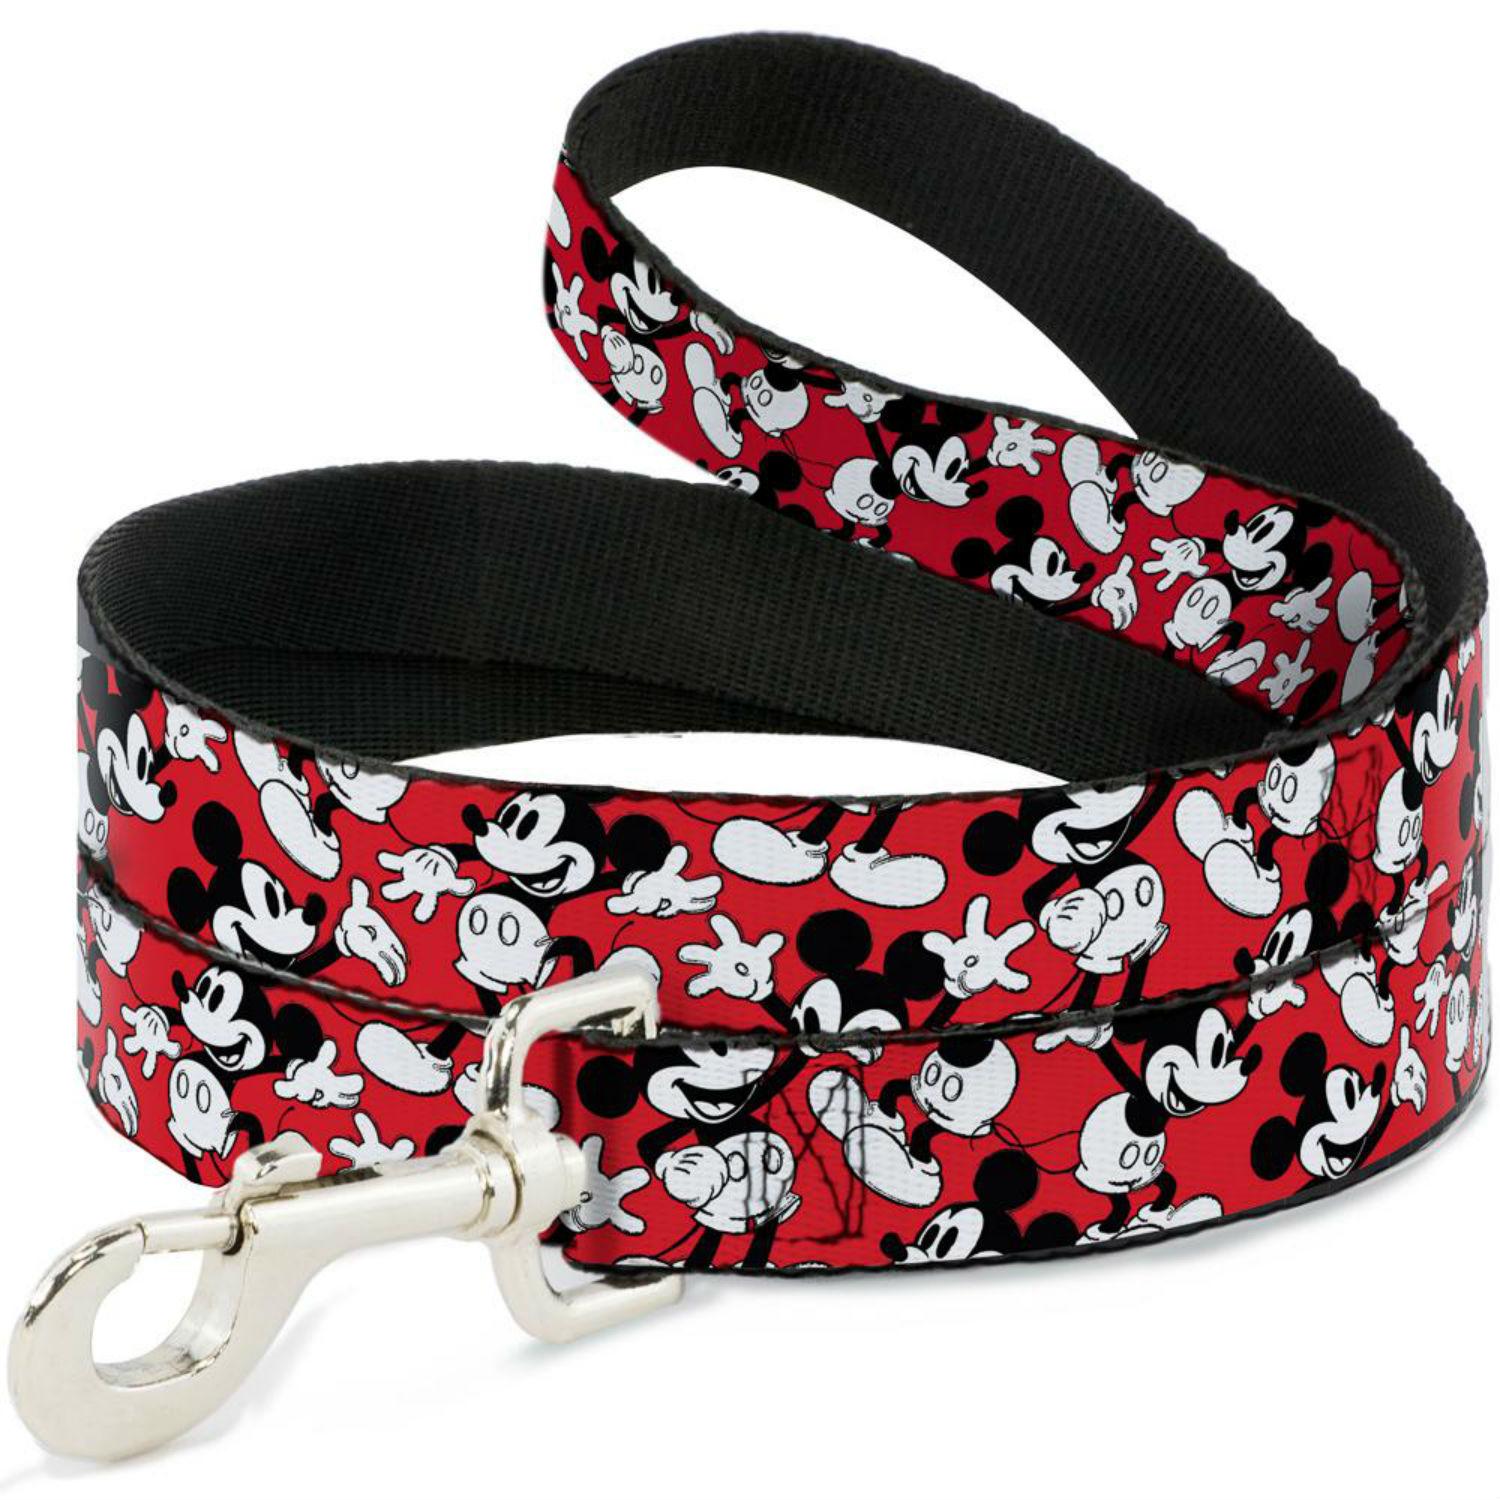 Mickey Mouse Poses Dog Leash by Buckle-Down - Red